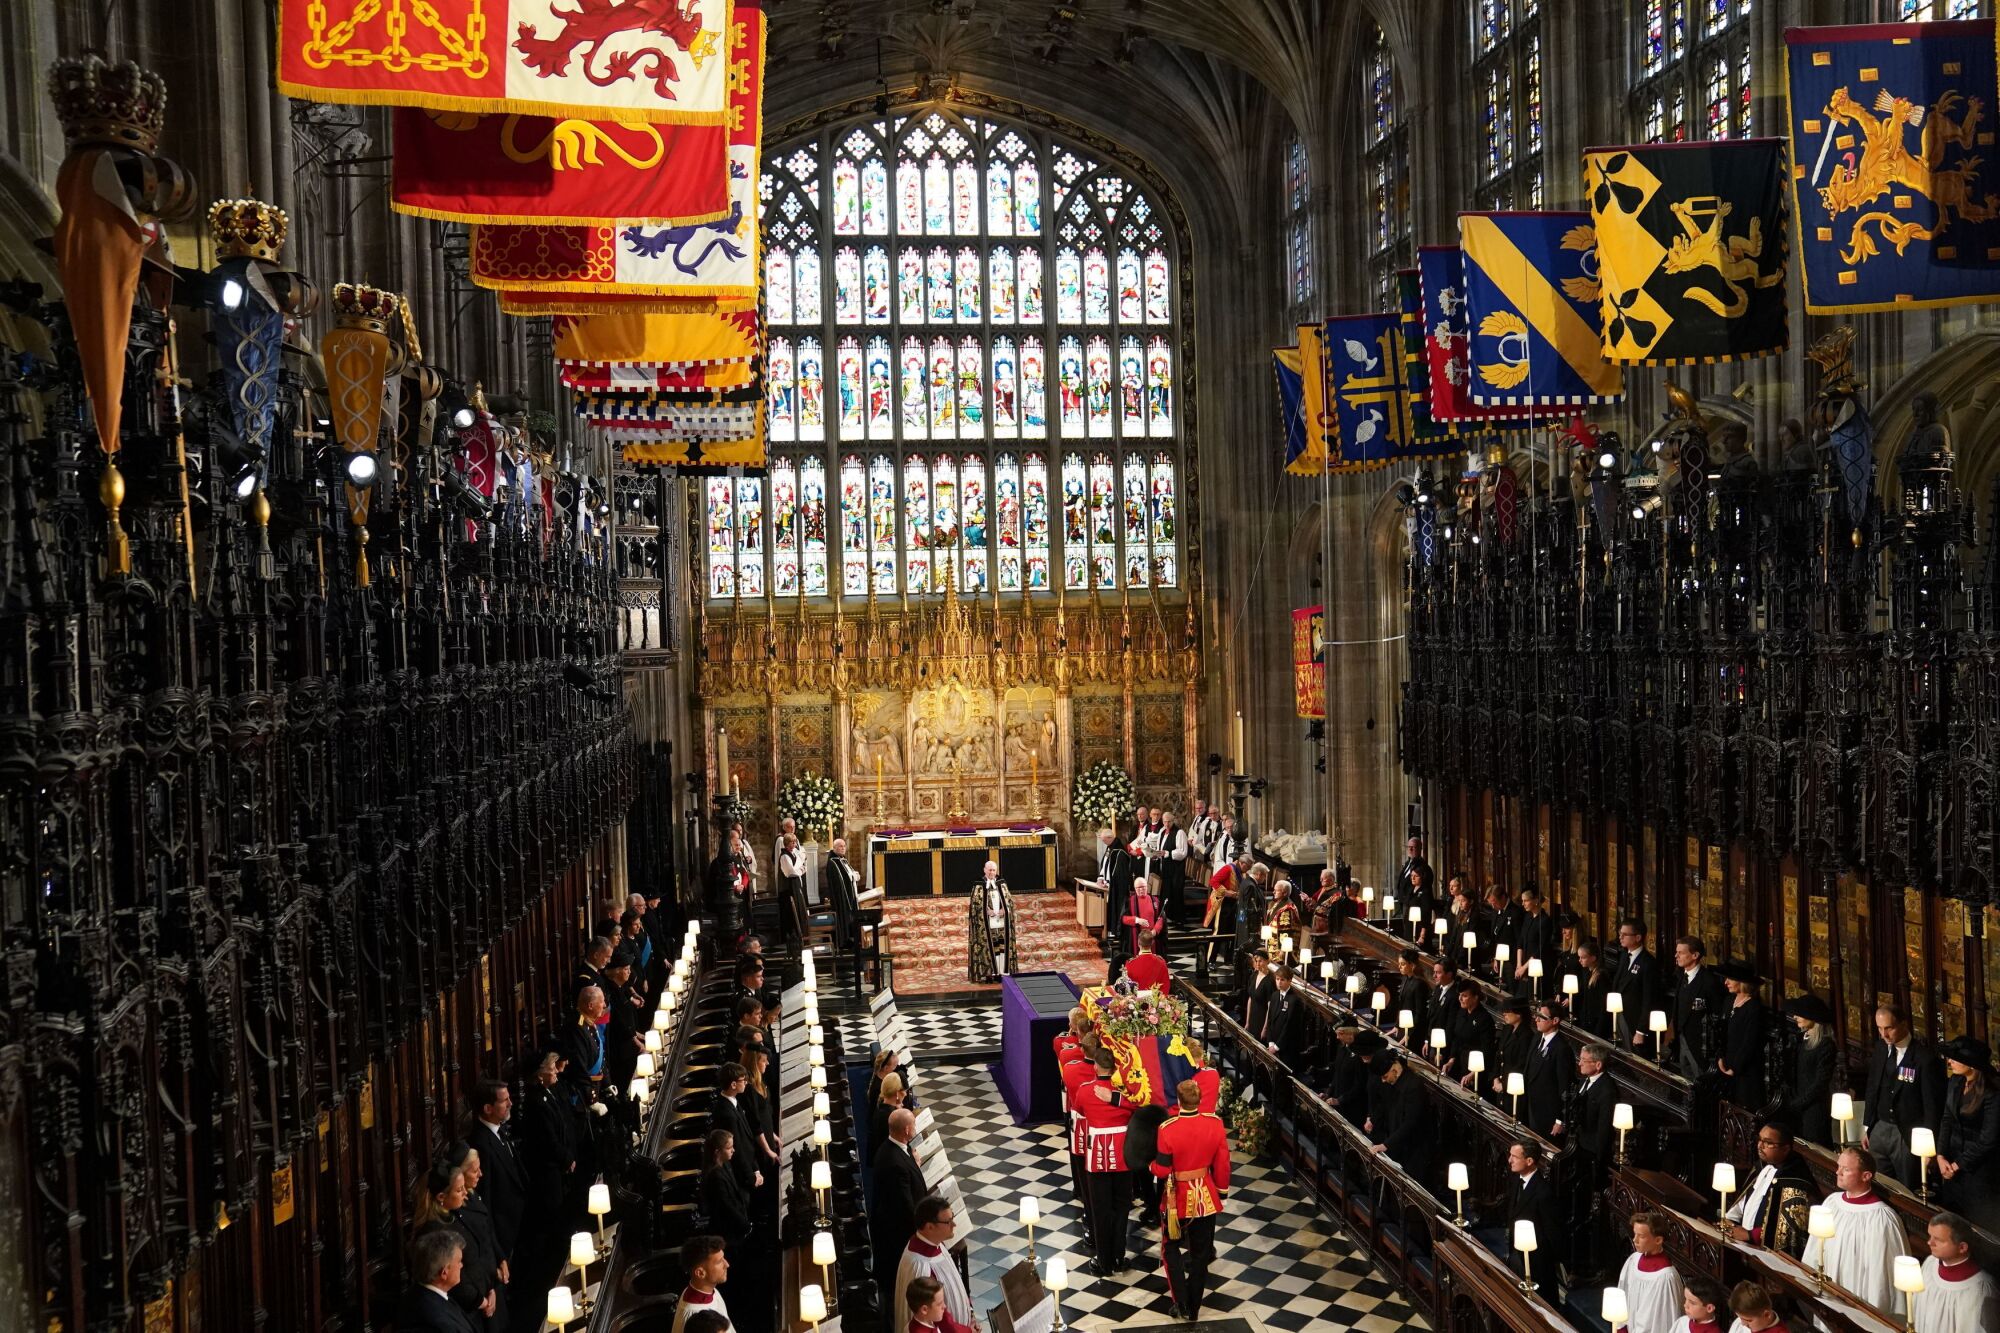 Uniformed pallbearers carry a coffin into St. George's Chapel as attendees stand in pews on either side of the aisle.